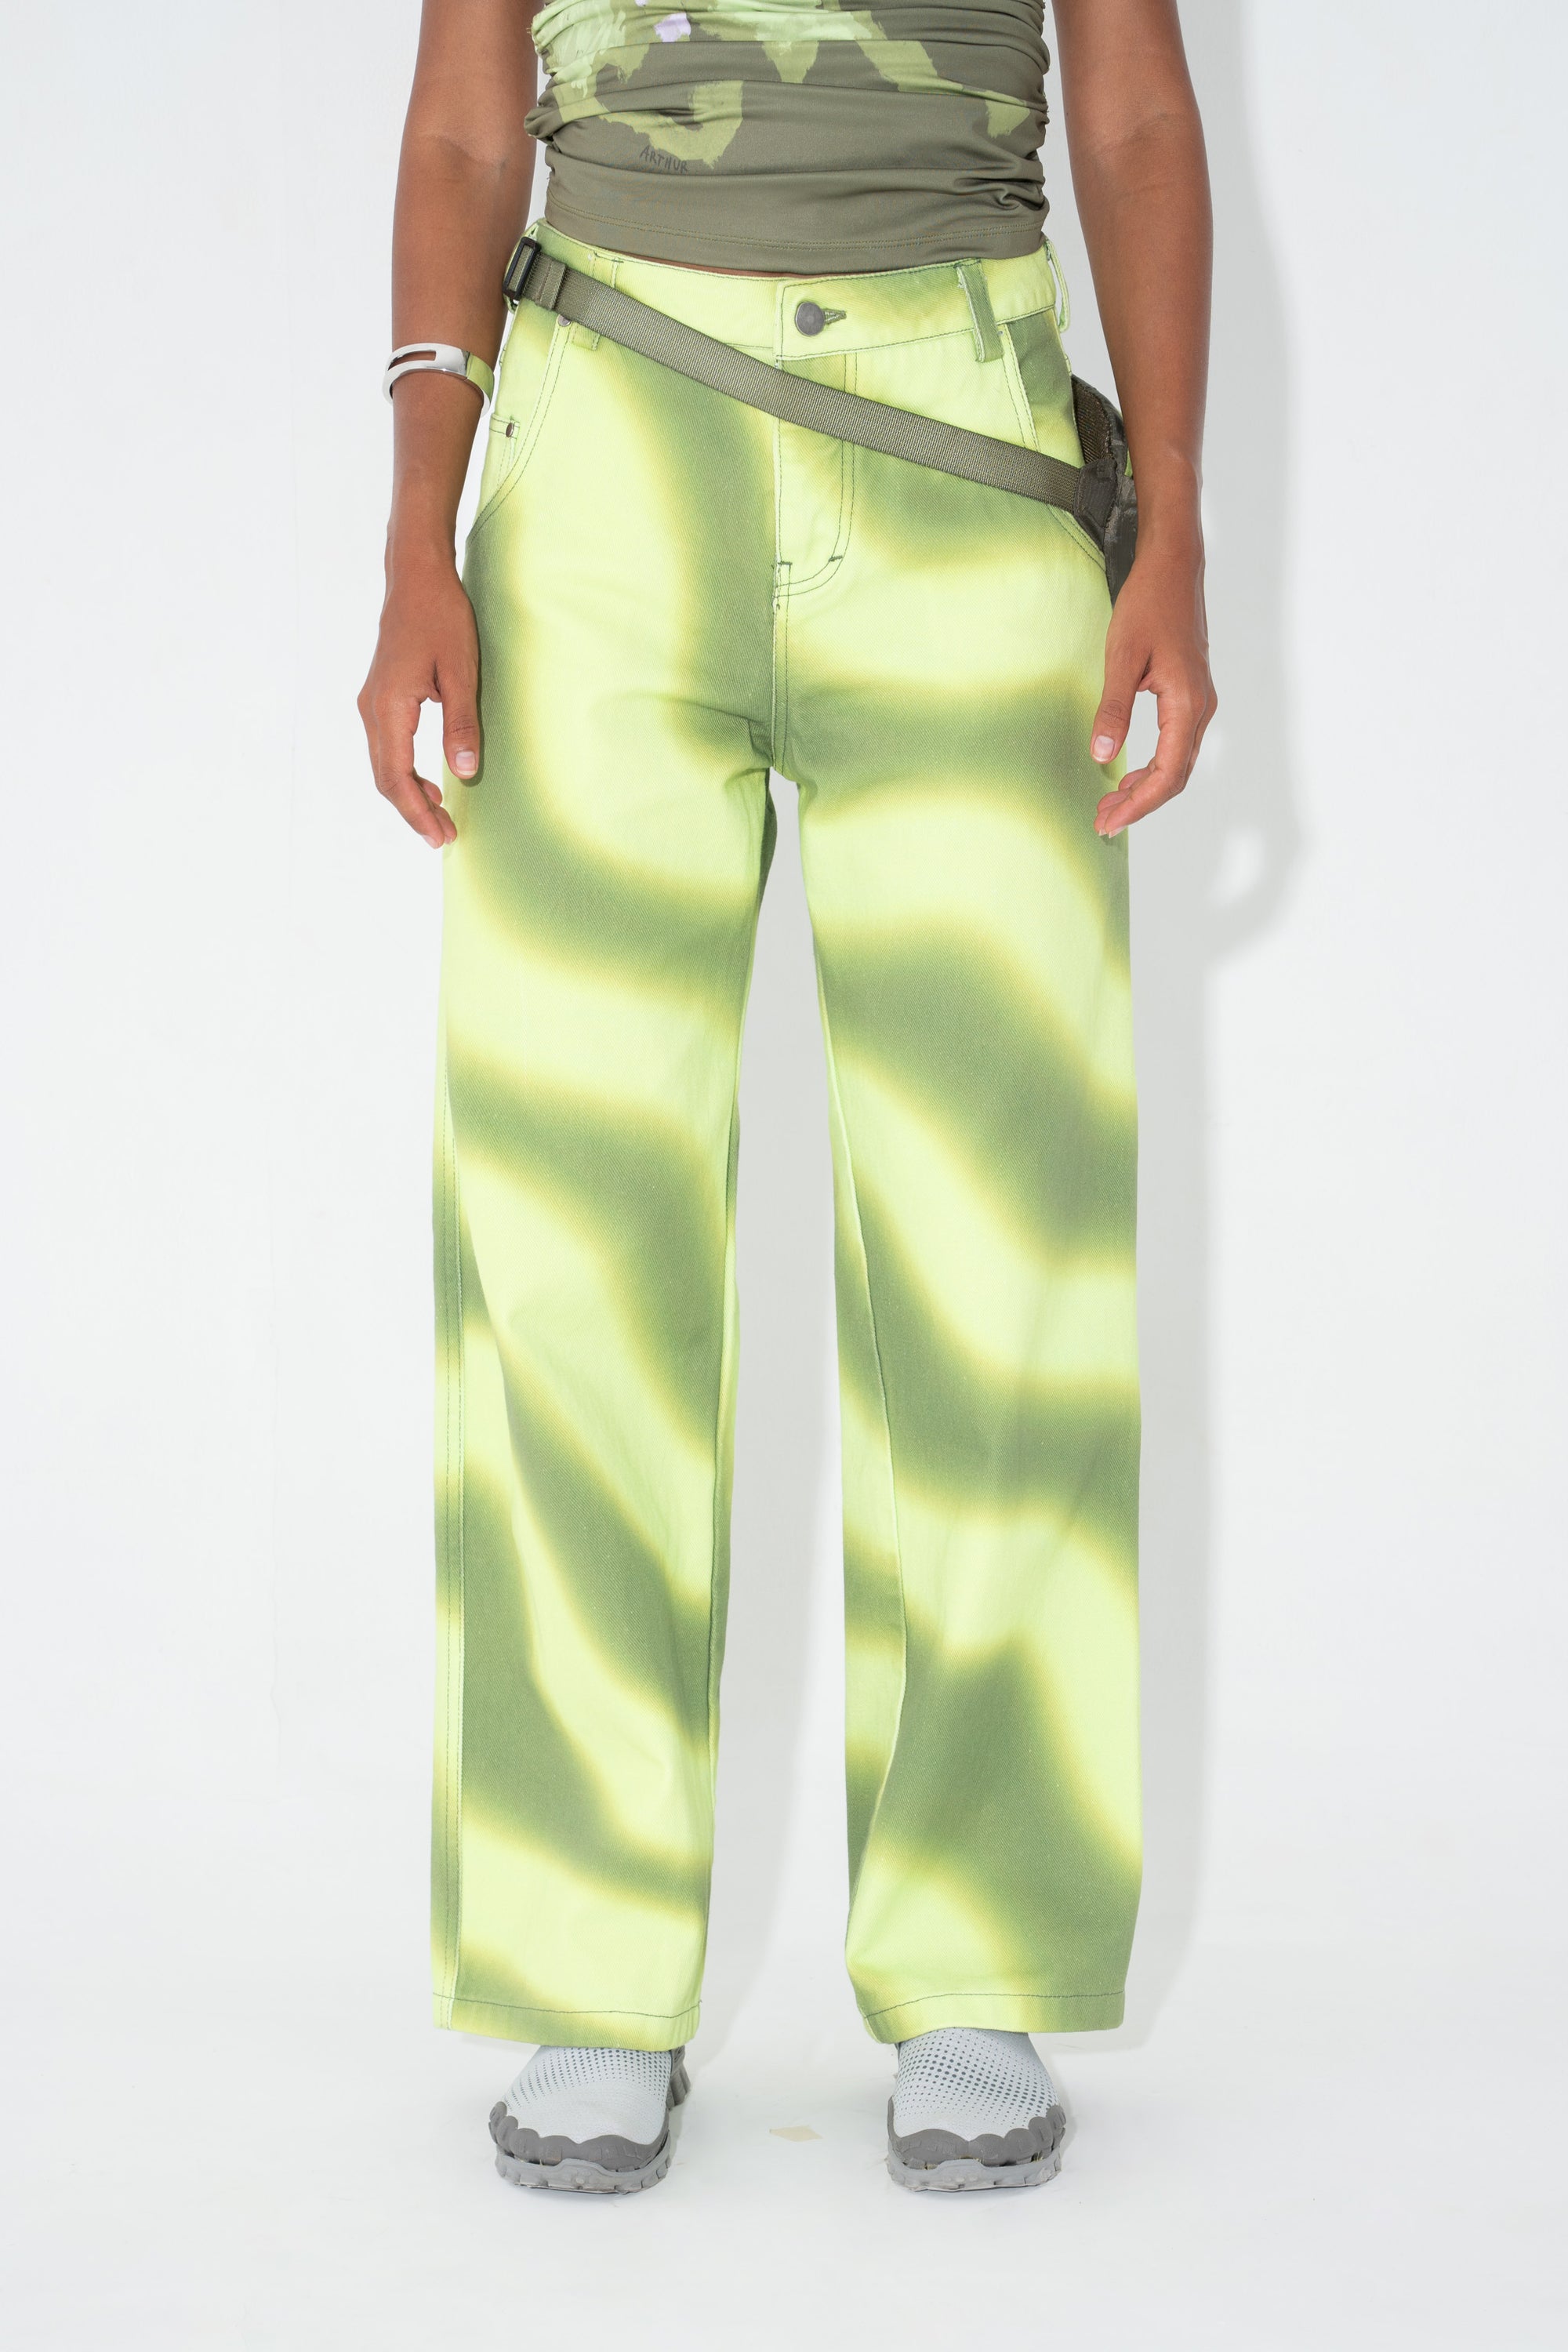 Arthur Apparel Green Graphic Mid Rise Relaxed Fit Jeans